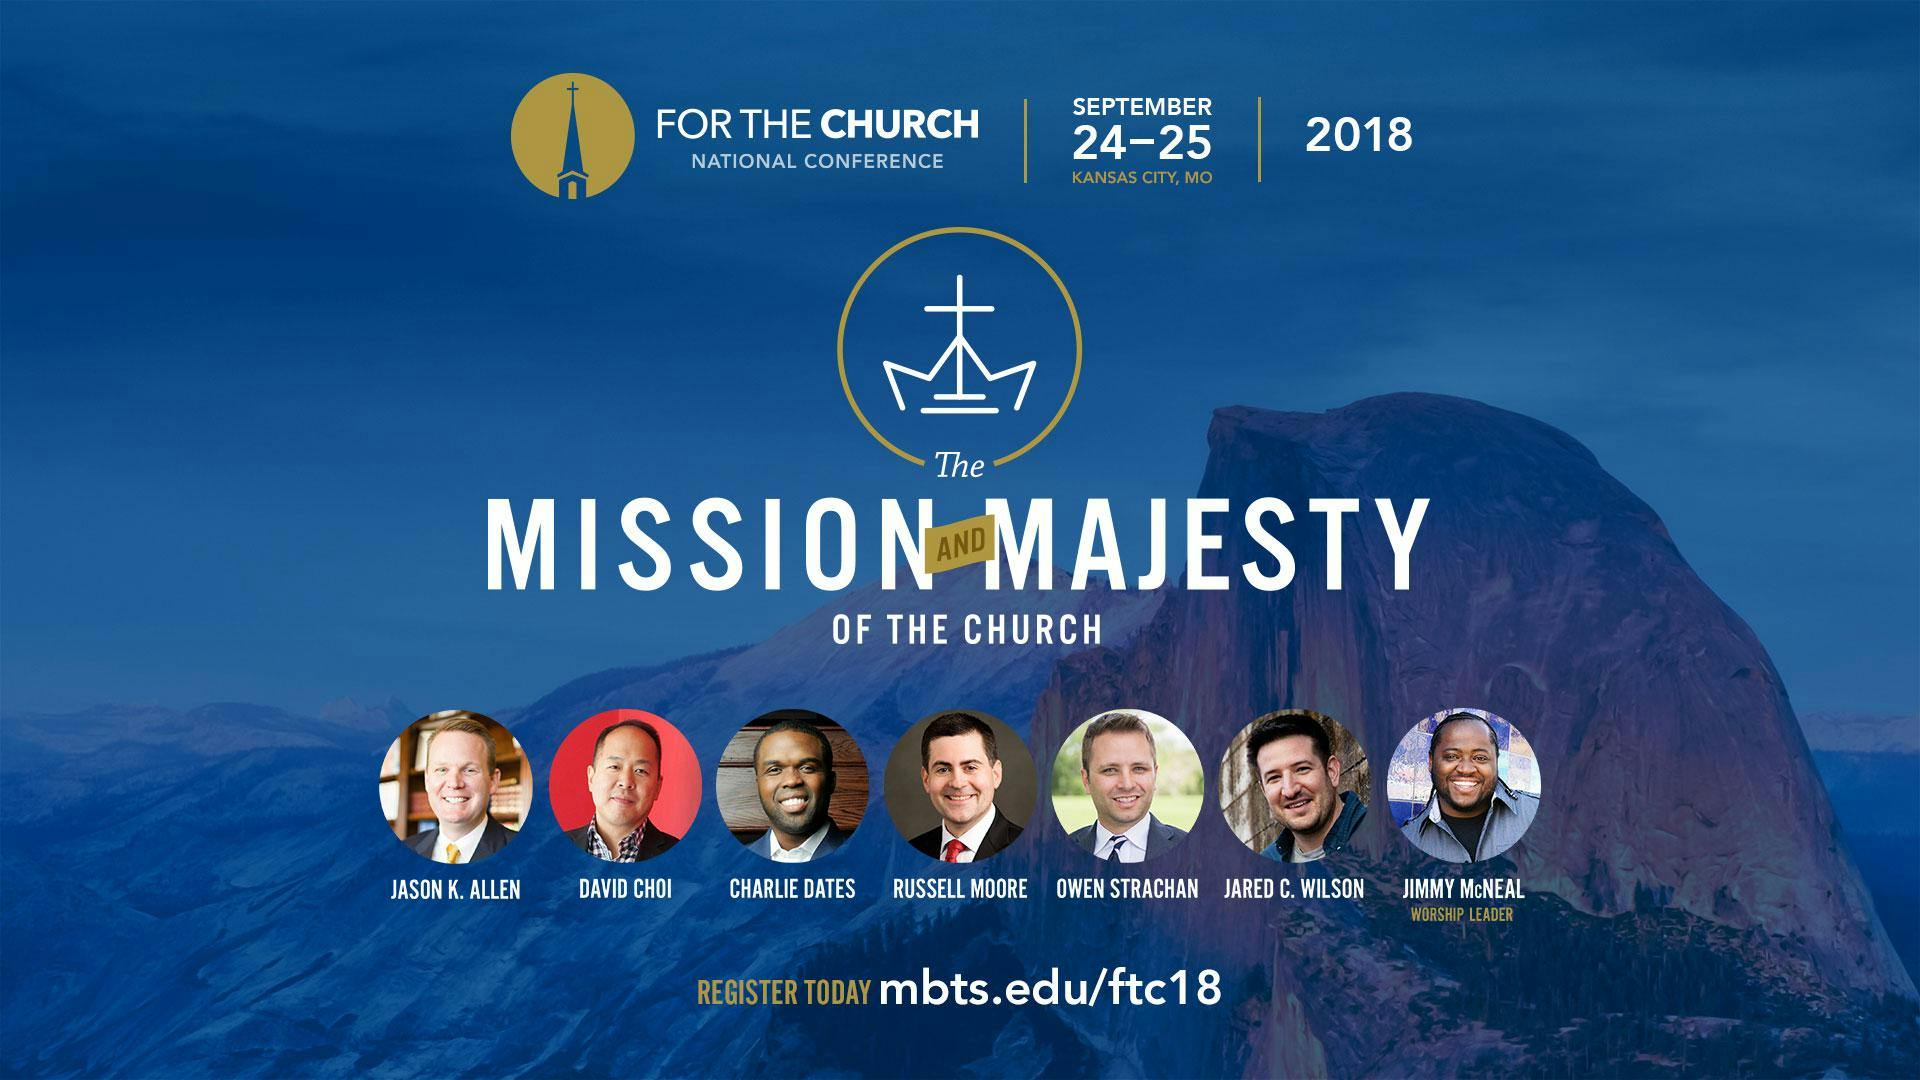 For The Church National Conference 2018